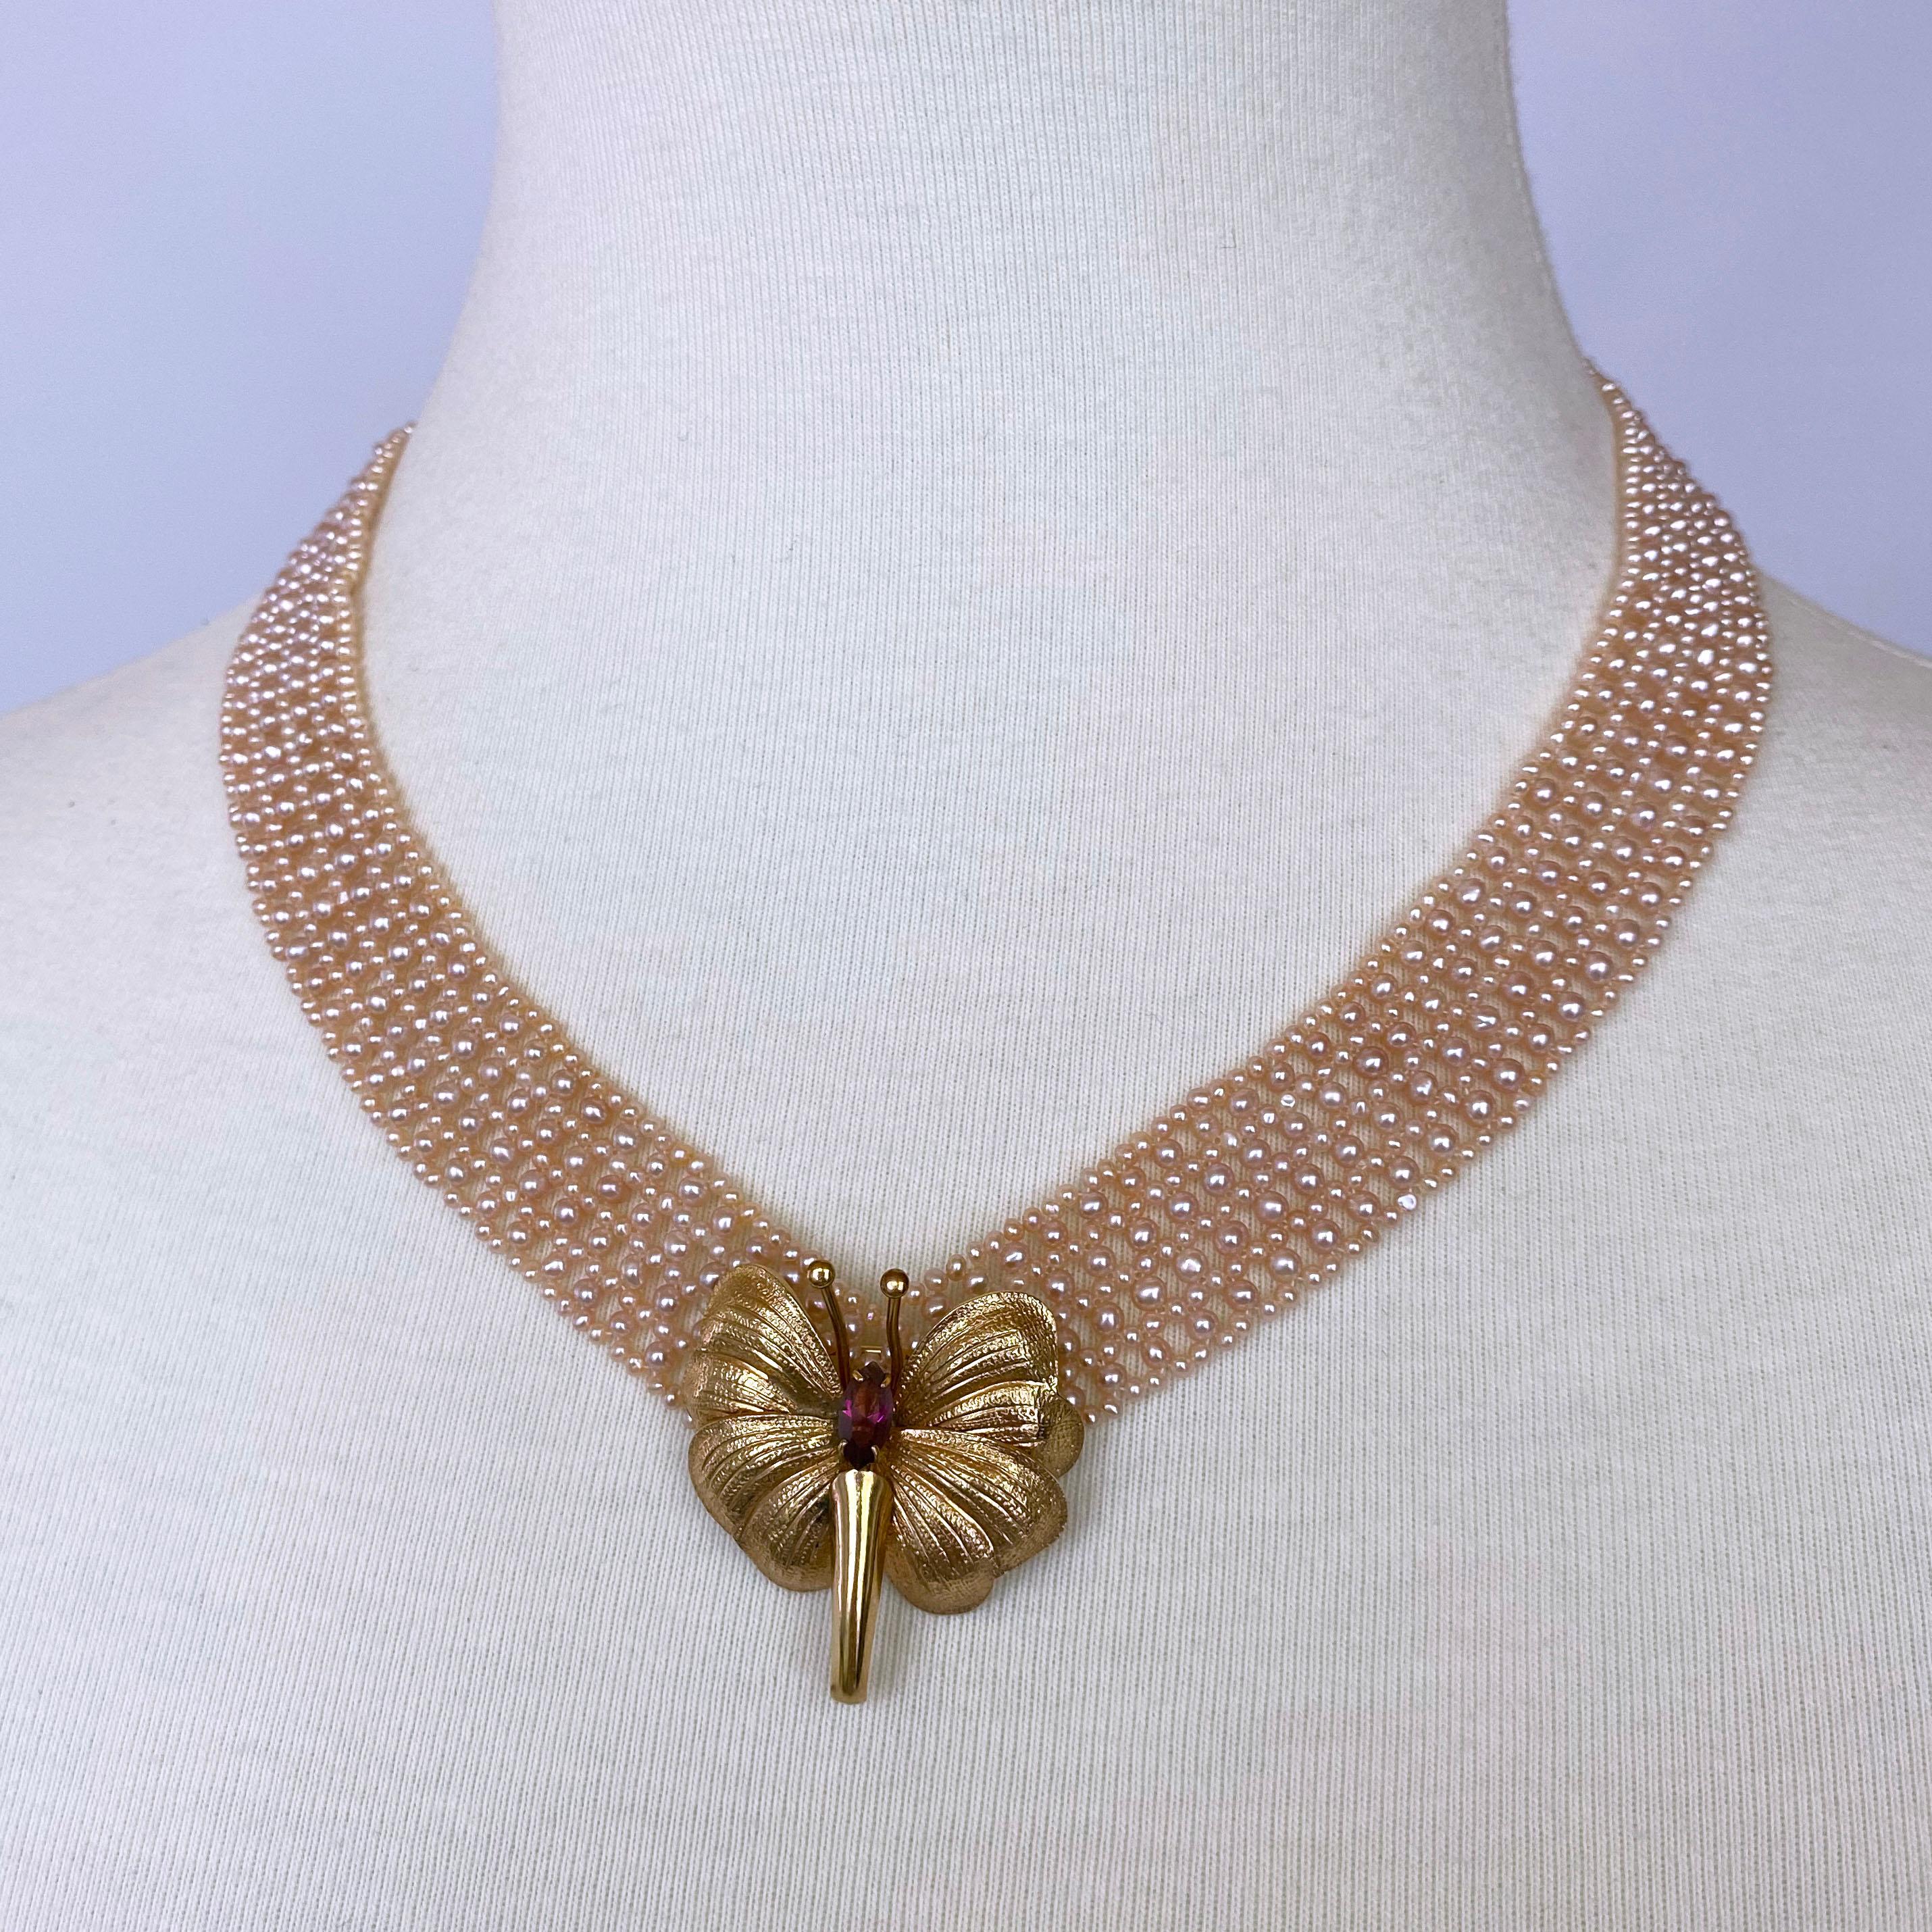 Gorgeous necklace by Marina J. This lovely piece is made using all cream colored Pink Pearls intricately woven together into a fine lace like design. This necklace displays multi sized Pearl columns woven into a dramatic 'V' shaped Necklace, perfect